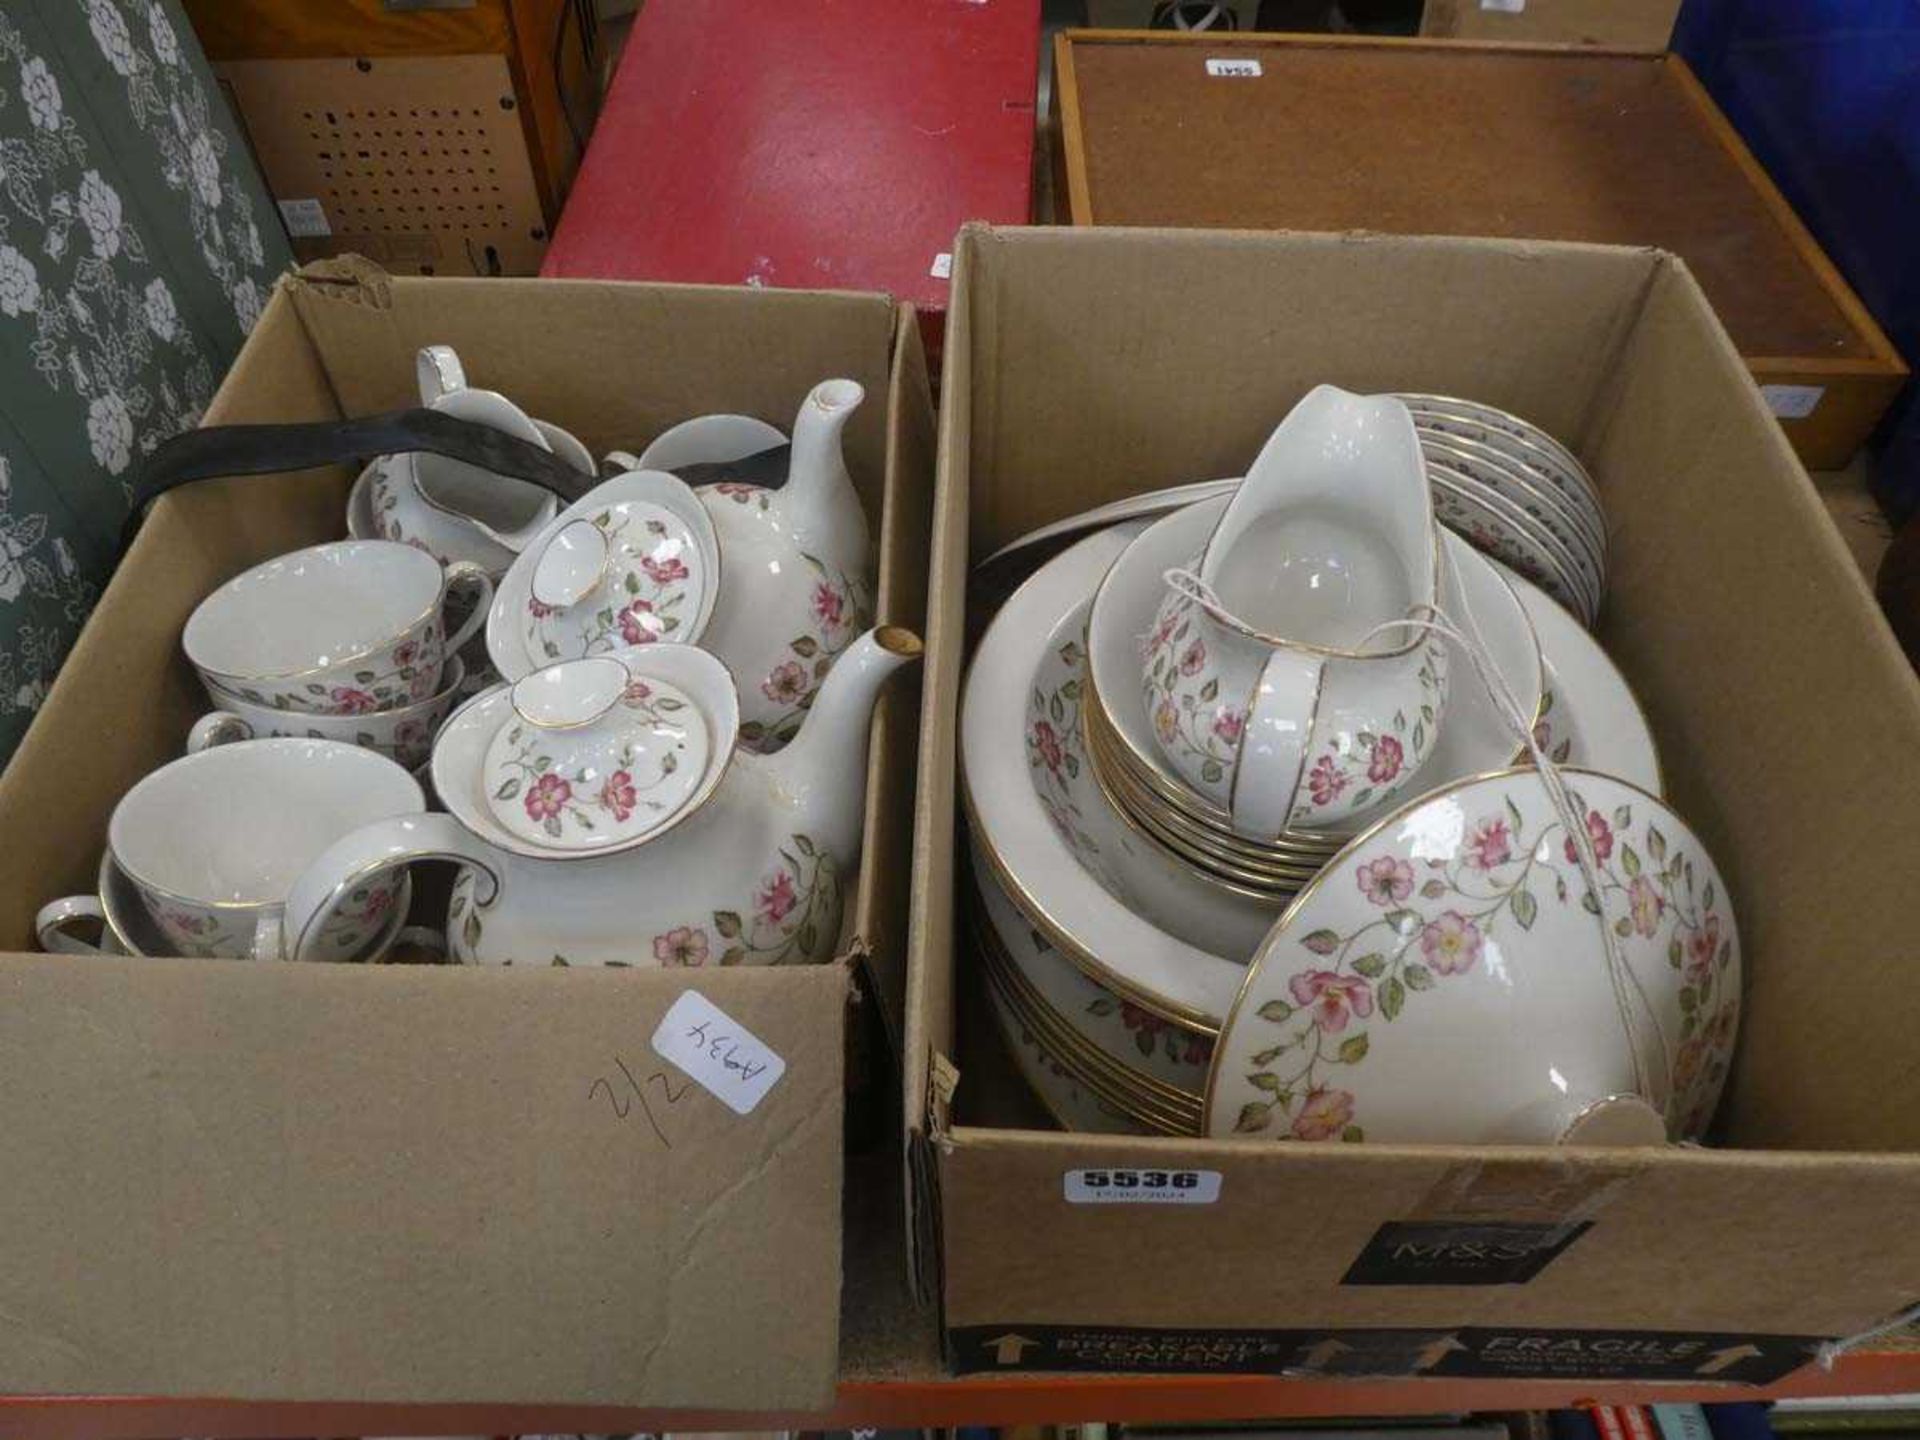 Two boxes containing Royal Doulton Woodland Rose patterned crockery